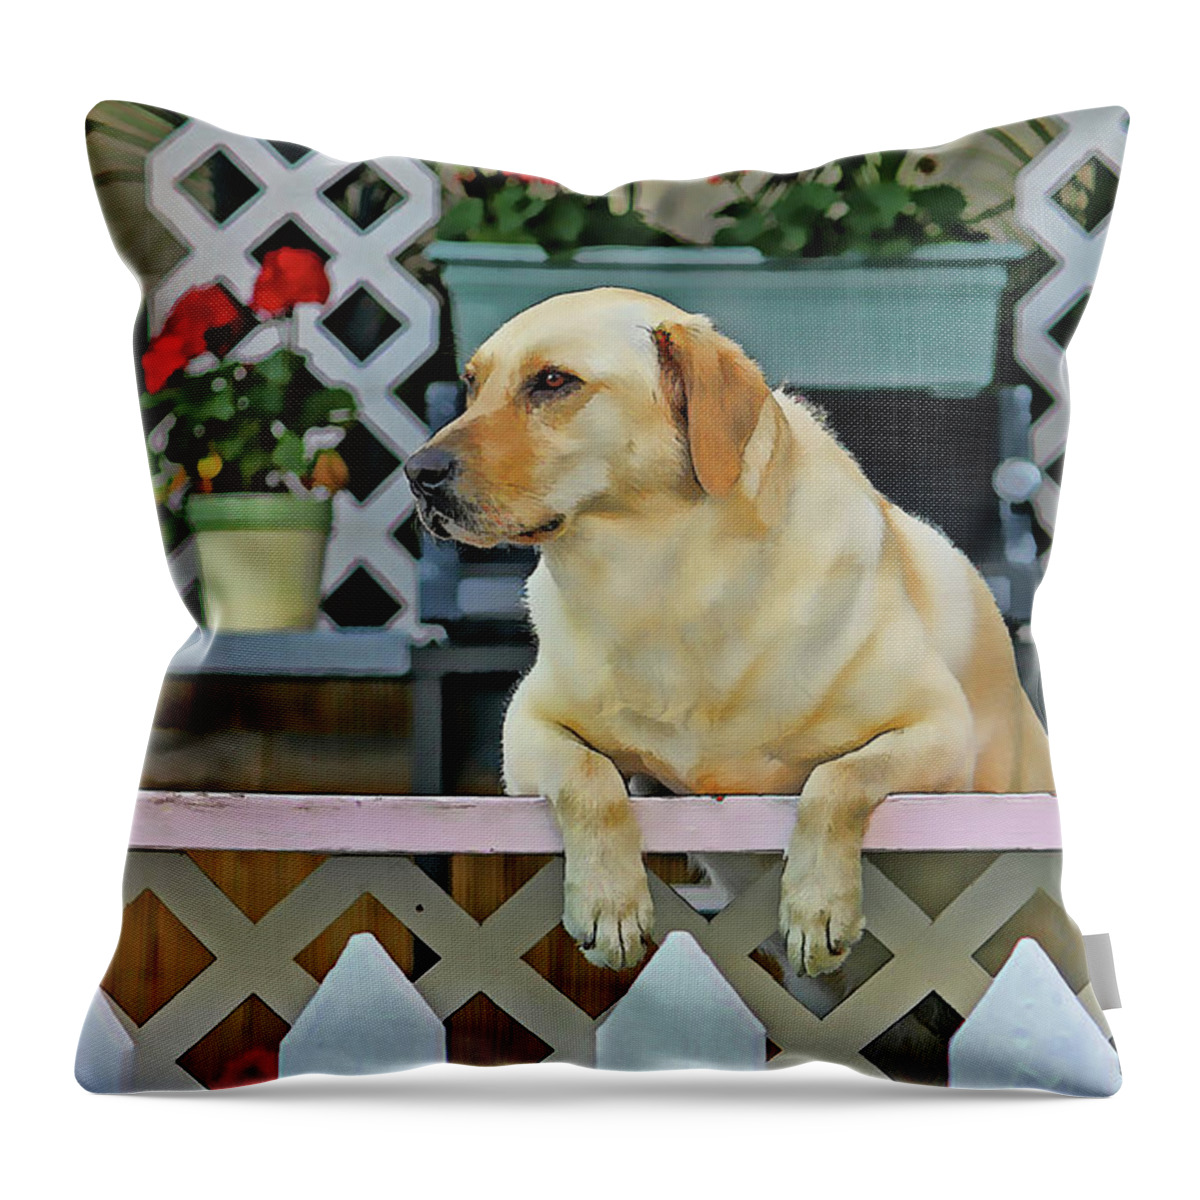 Labrador Retriever Throw Pillow featuring the photograph People Watching by HH Photography of Florida